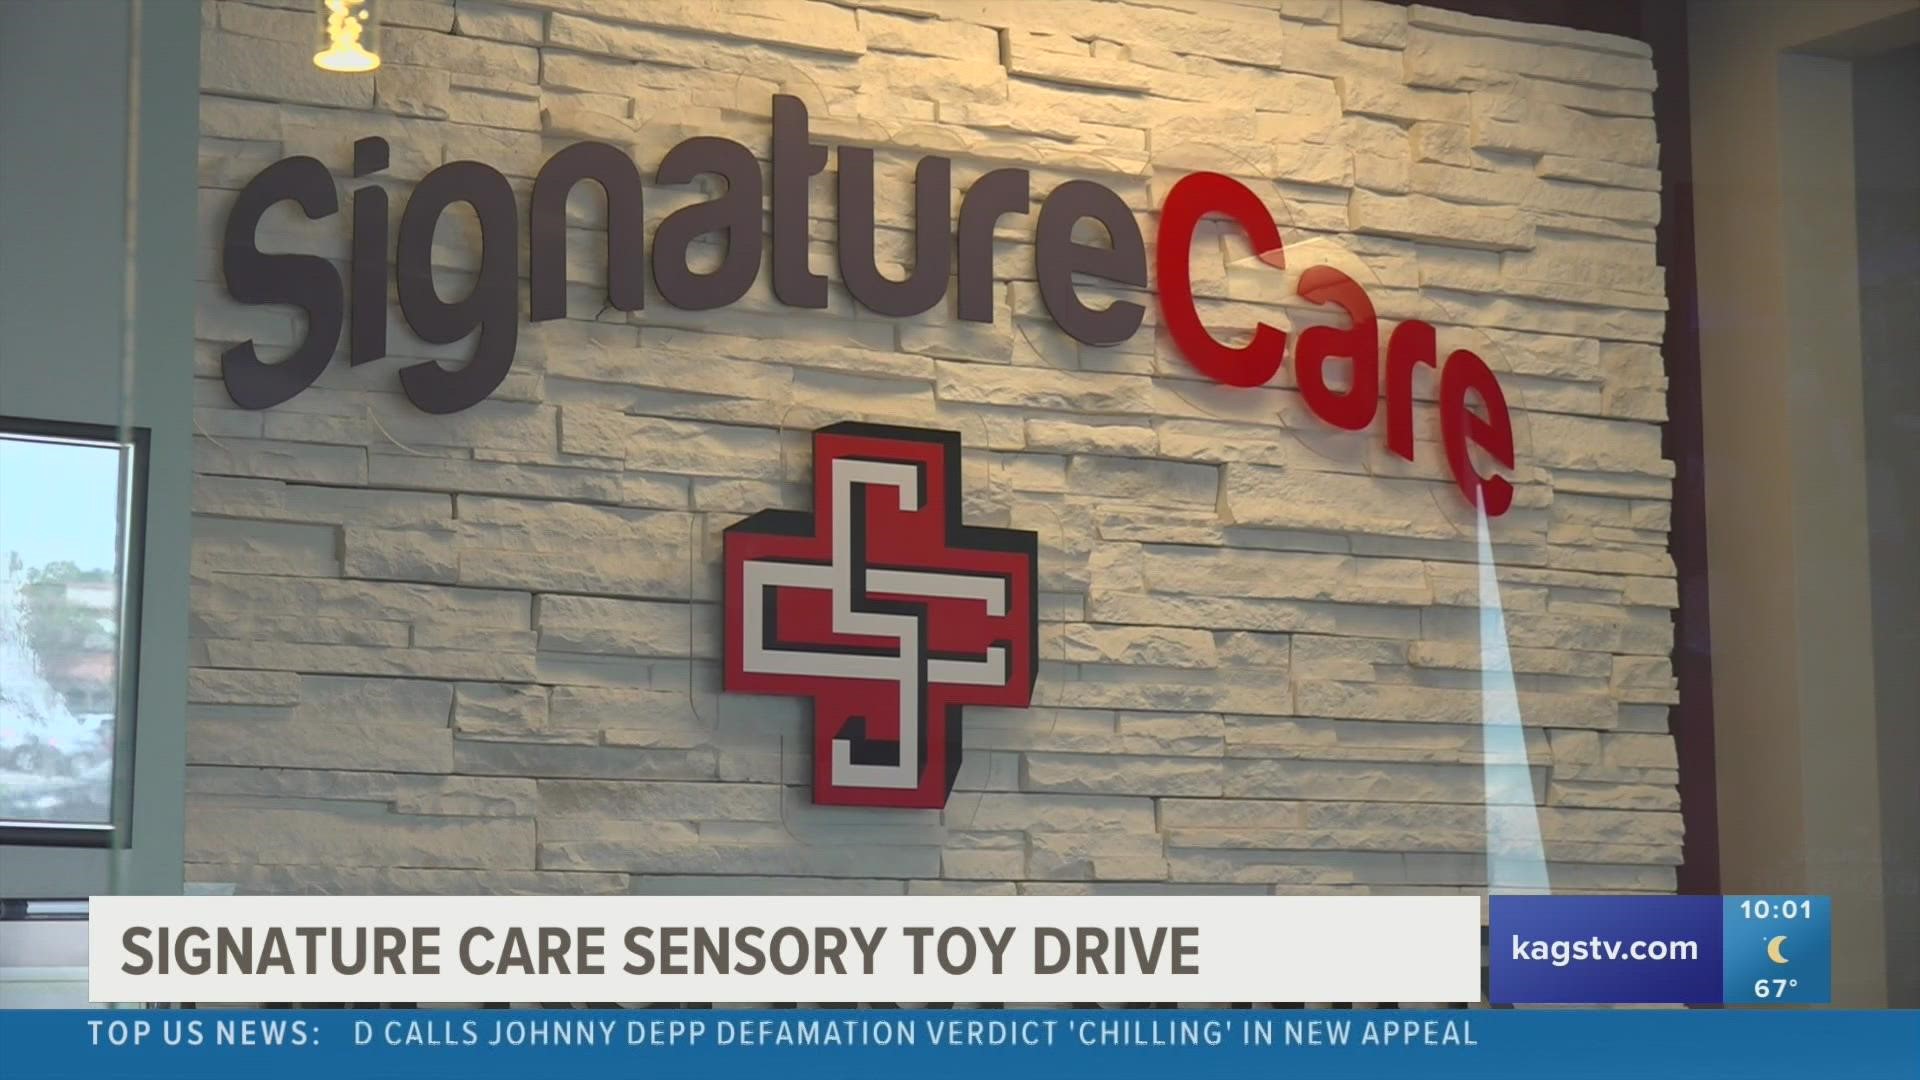 The emergency room is hosting a sensory toy drive for special needs children and elders starting on Dec. 7.